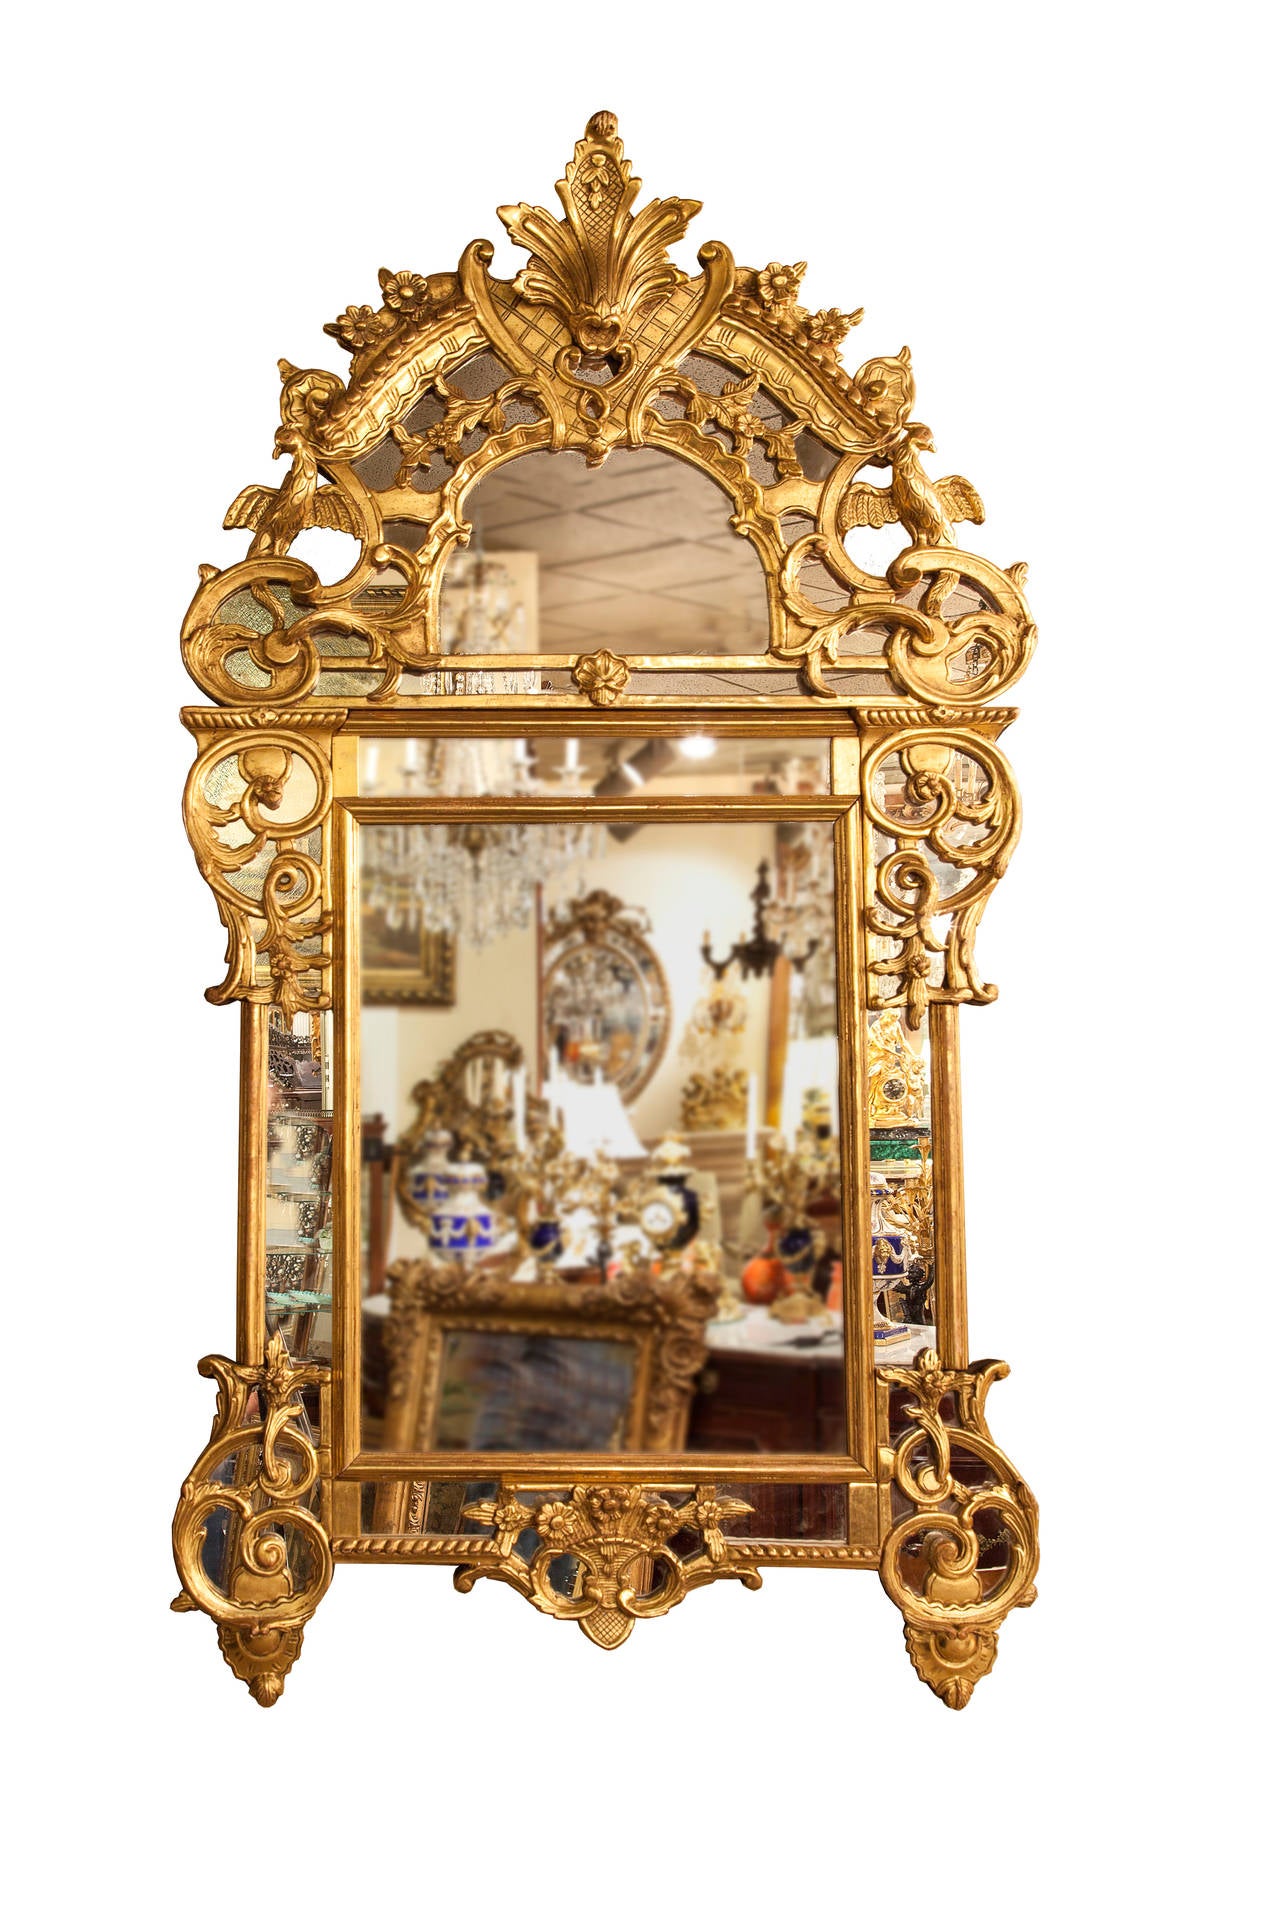 Ornate French mirror
highly gilded 
exceptional carving including birds
and curved flourishes.